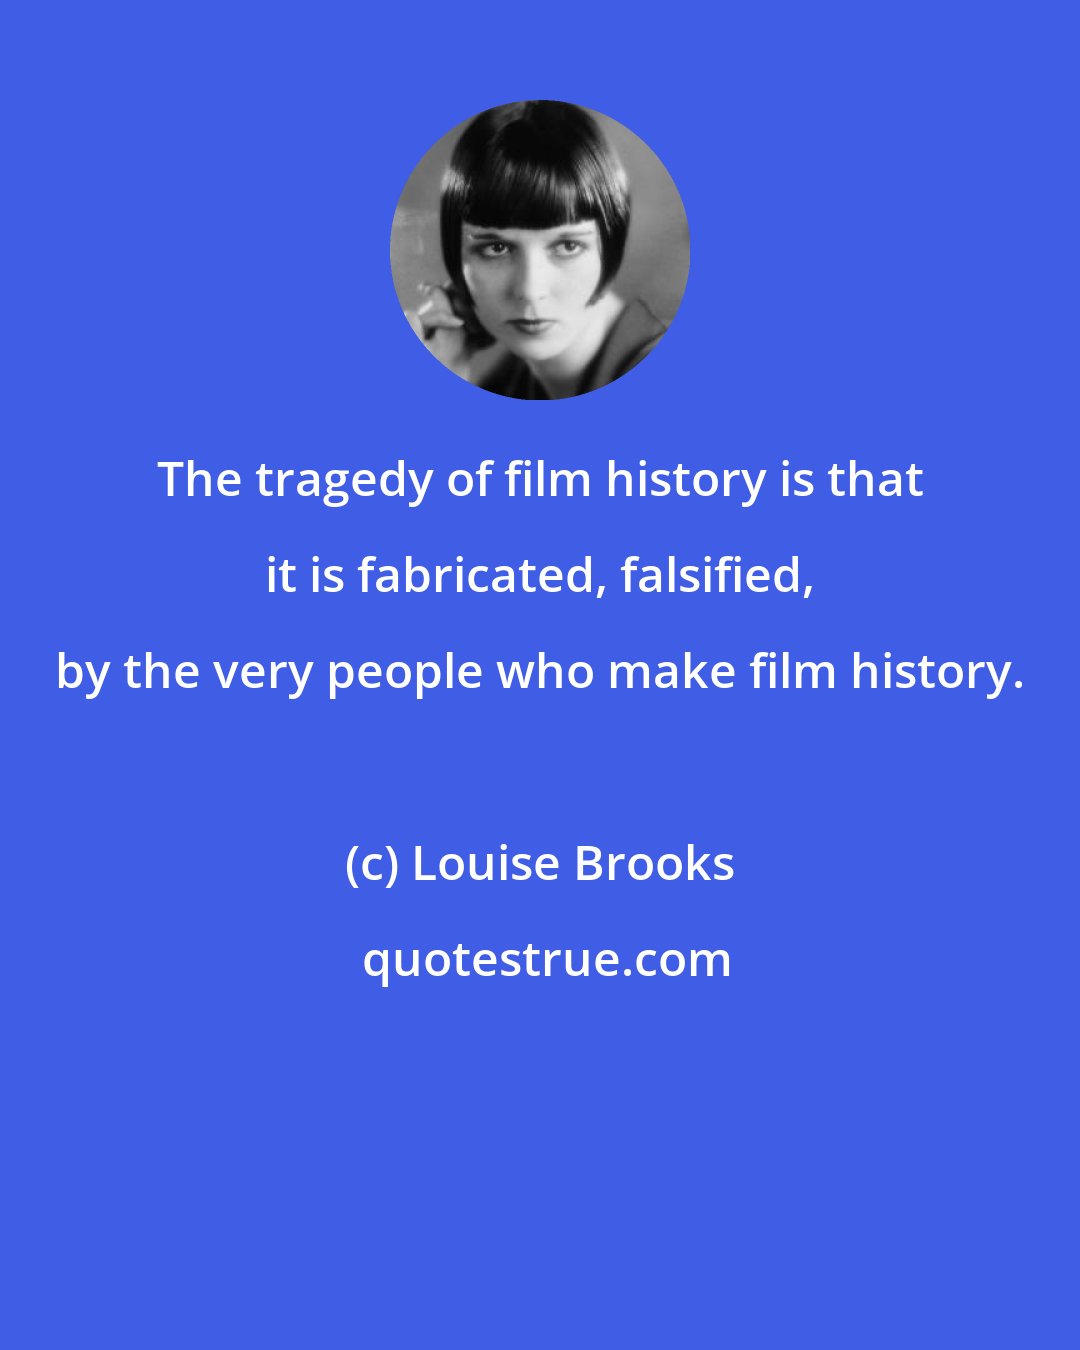 Louise Brooks: The tragedy of film history is that it is fabricated, falsified, by the very people who make film history.